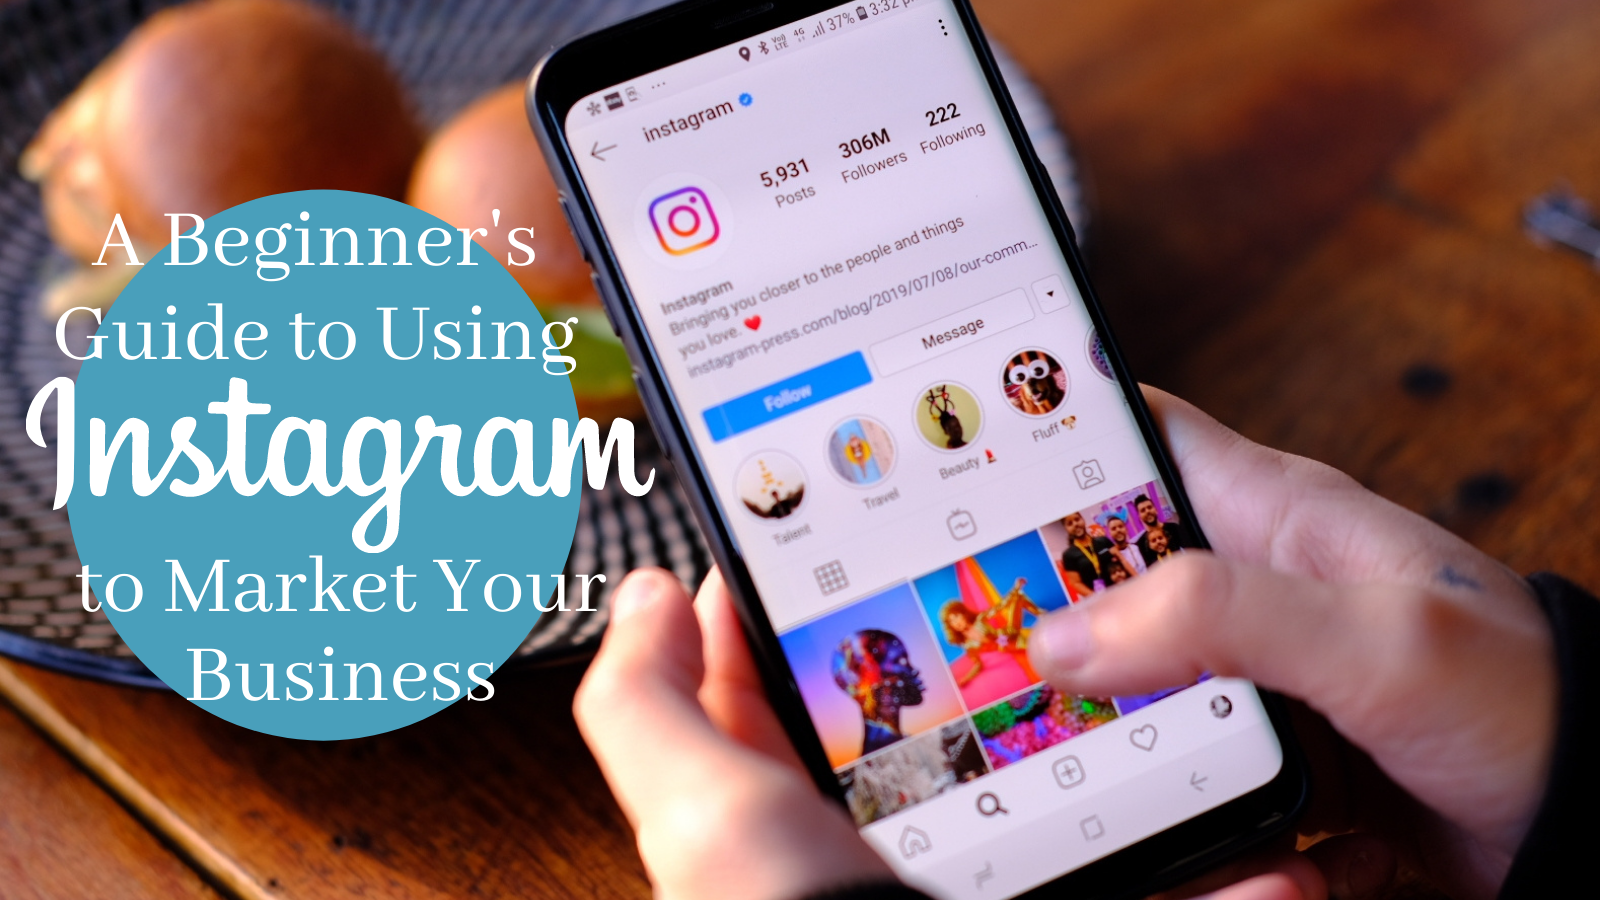 A Beginner's Guide to Using Instagram to Market Your Business